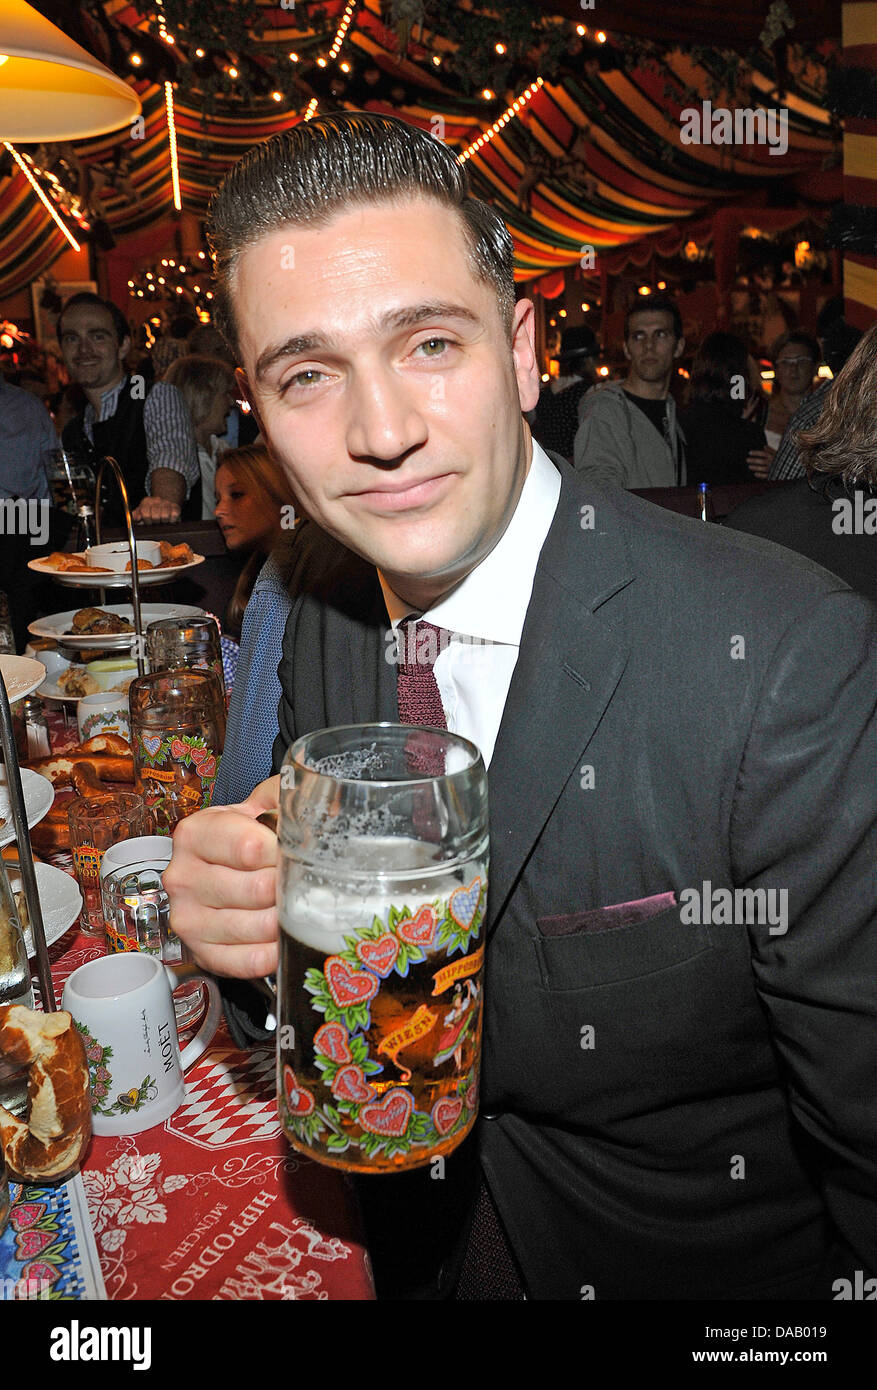 Reg Traviss, ex boyfriend of Amy Winehouse,  celebrates during the Oktoberfest at the Hippodrom tent in Munich, Germany, 22 September 2011. The 178th Oktoberfest runs until 3 October and will attract visitors from all parts of the world to Bavaria. Photo: Ursula Dueren Stock Photo